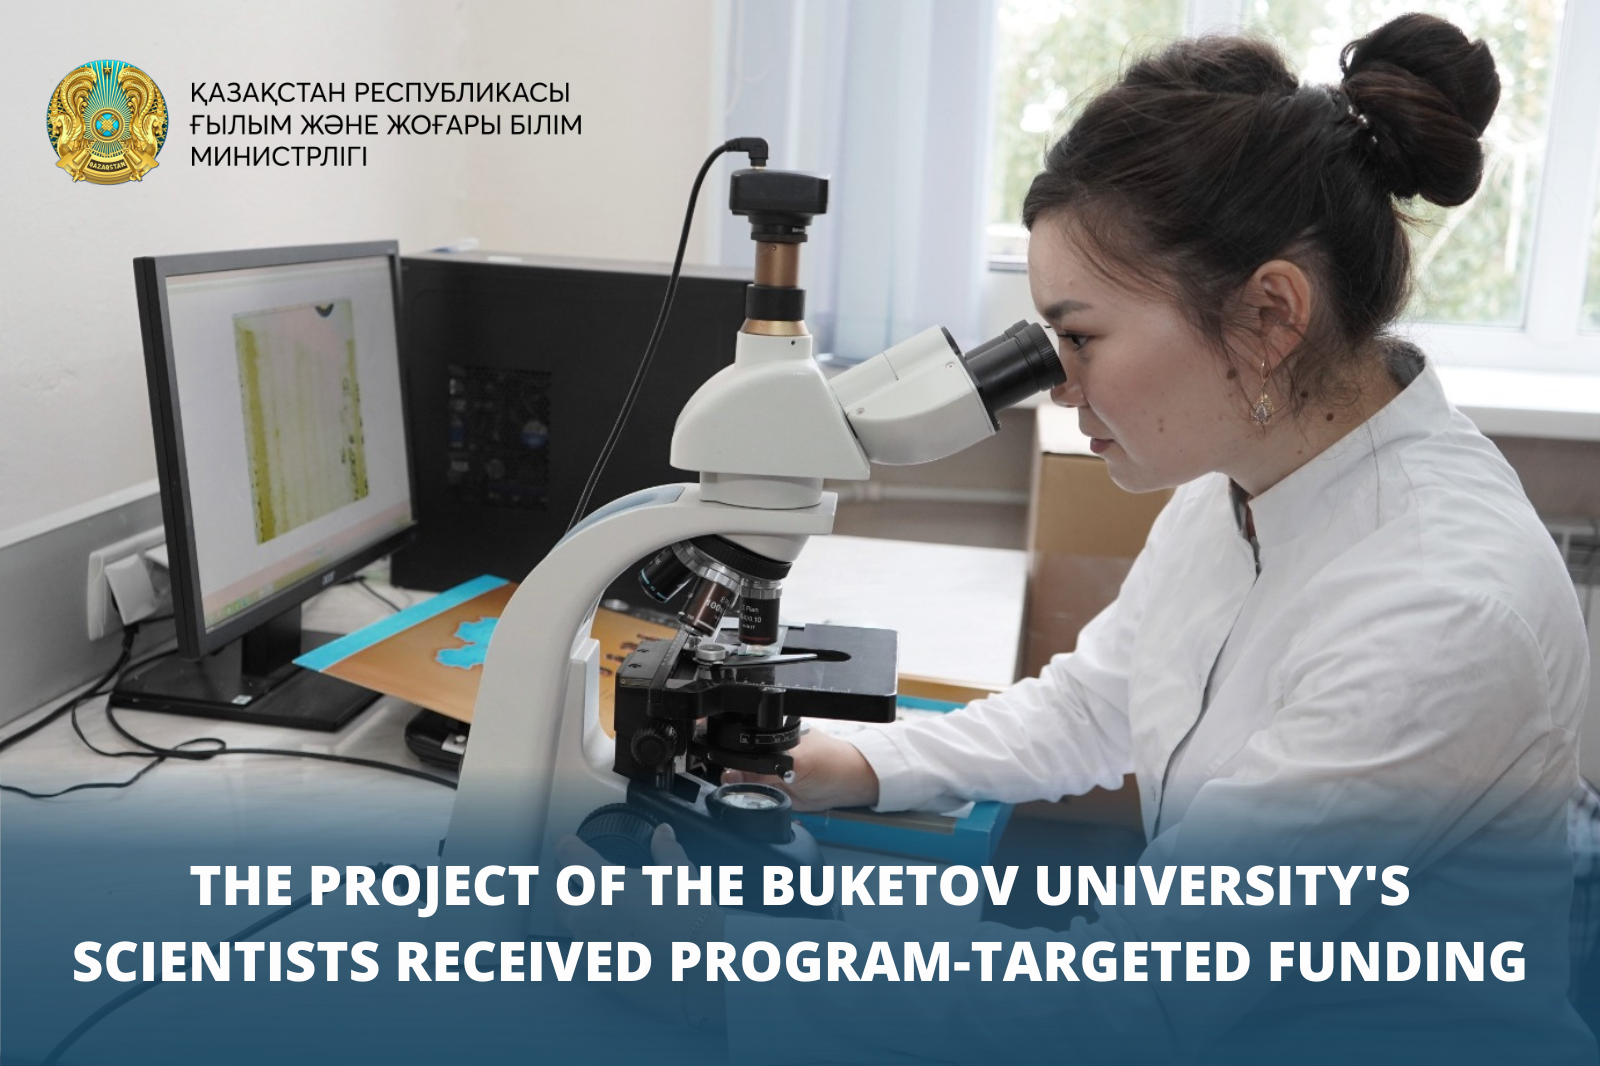 THE PROJECT OF THE BUKETOV UNIVERSITY'S SCIENTISTS RECEIVED PROGRAM-TARGETED FUNDING